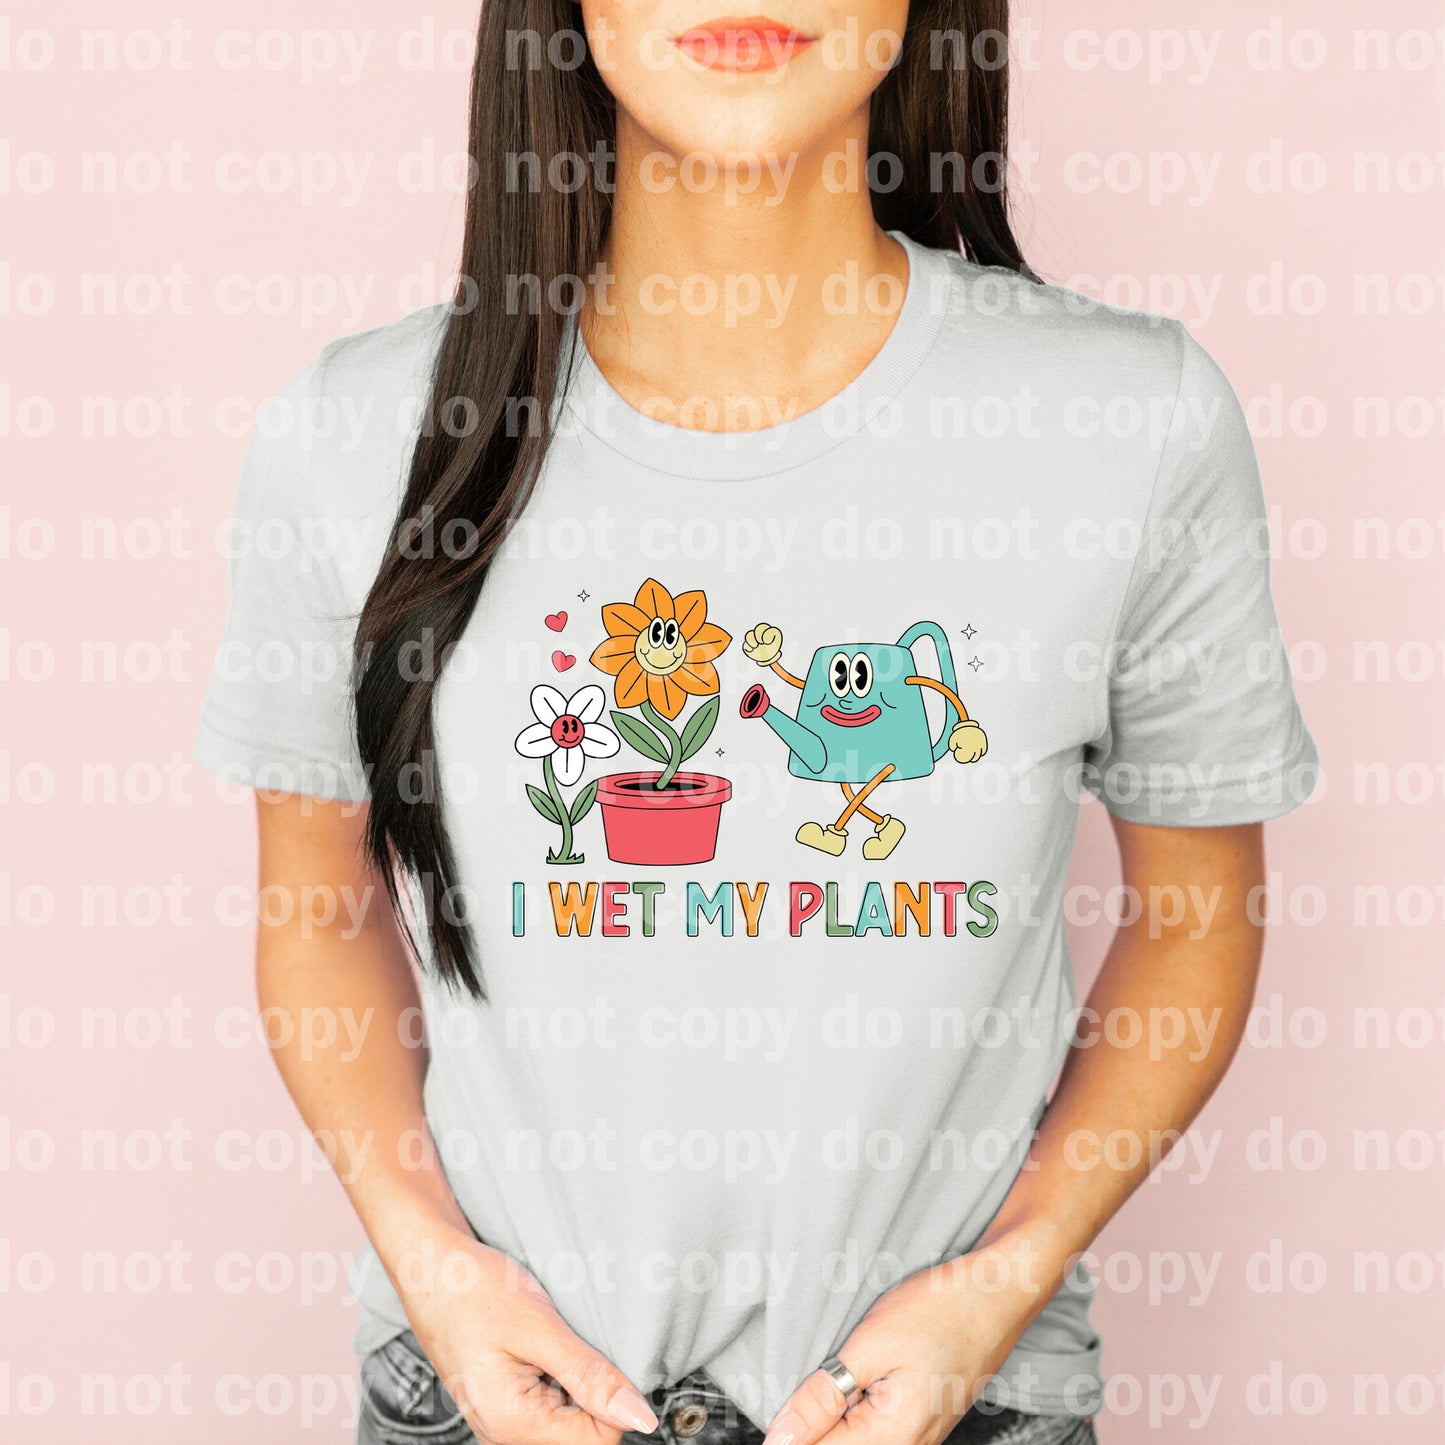 I Wet My Plants Dream Print or Sublimation Print